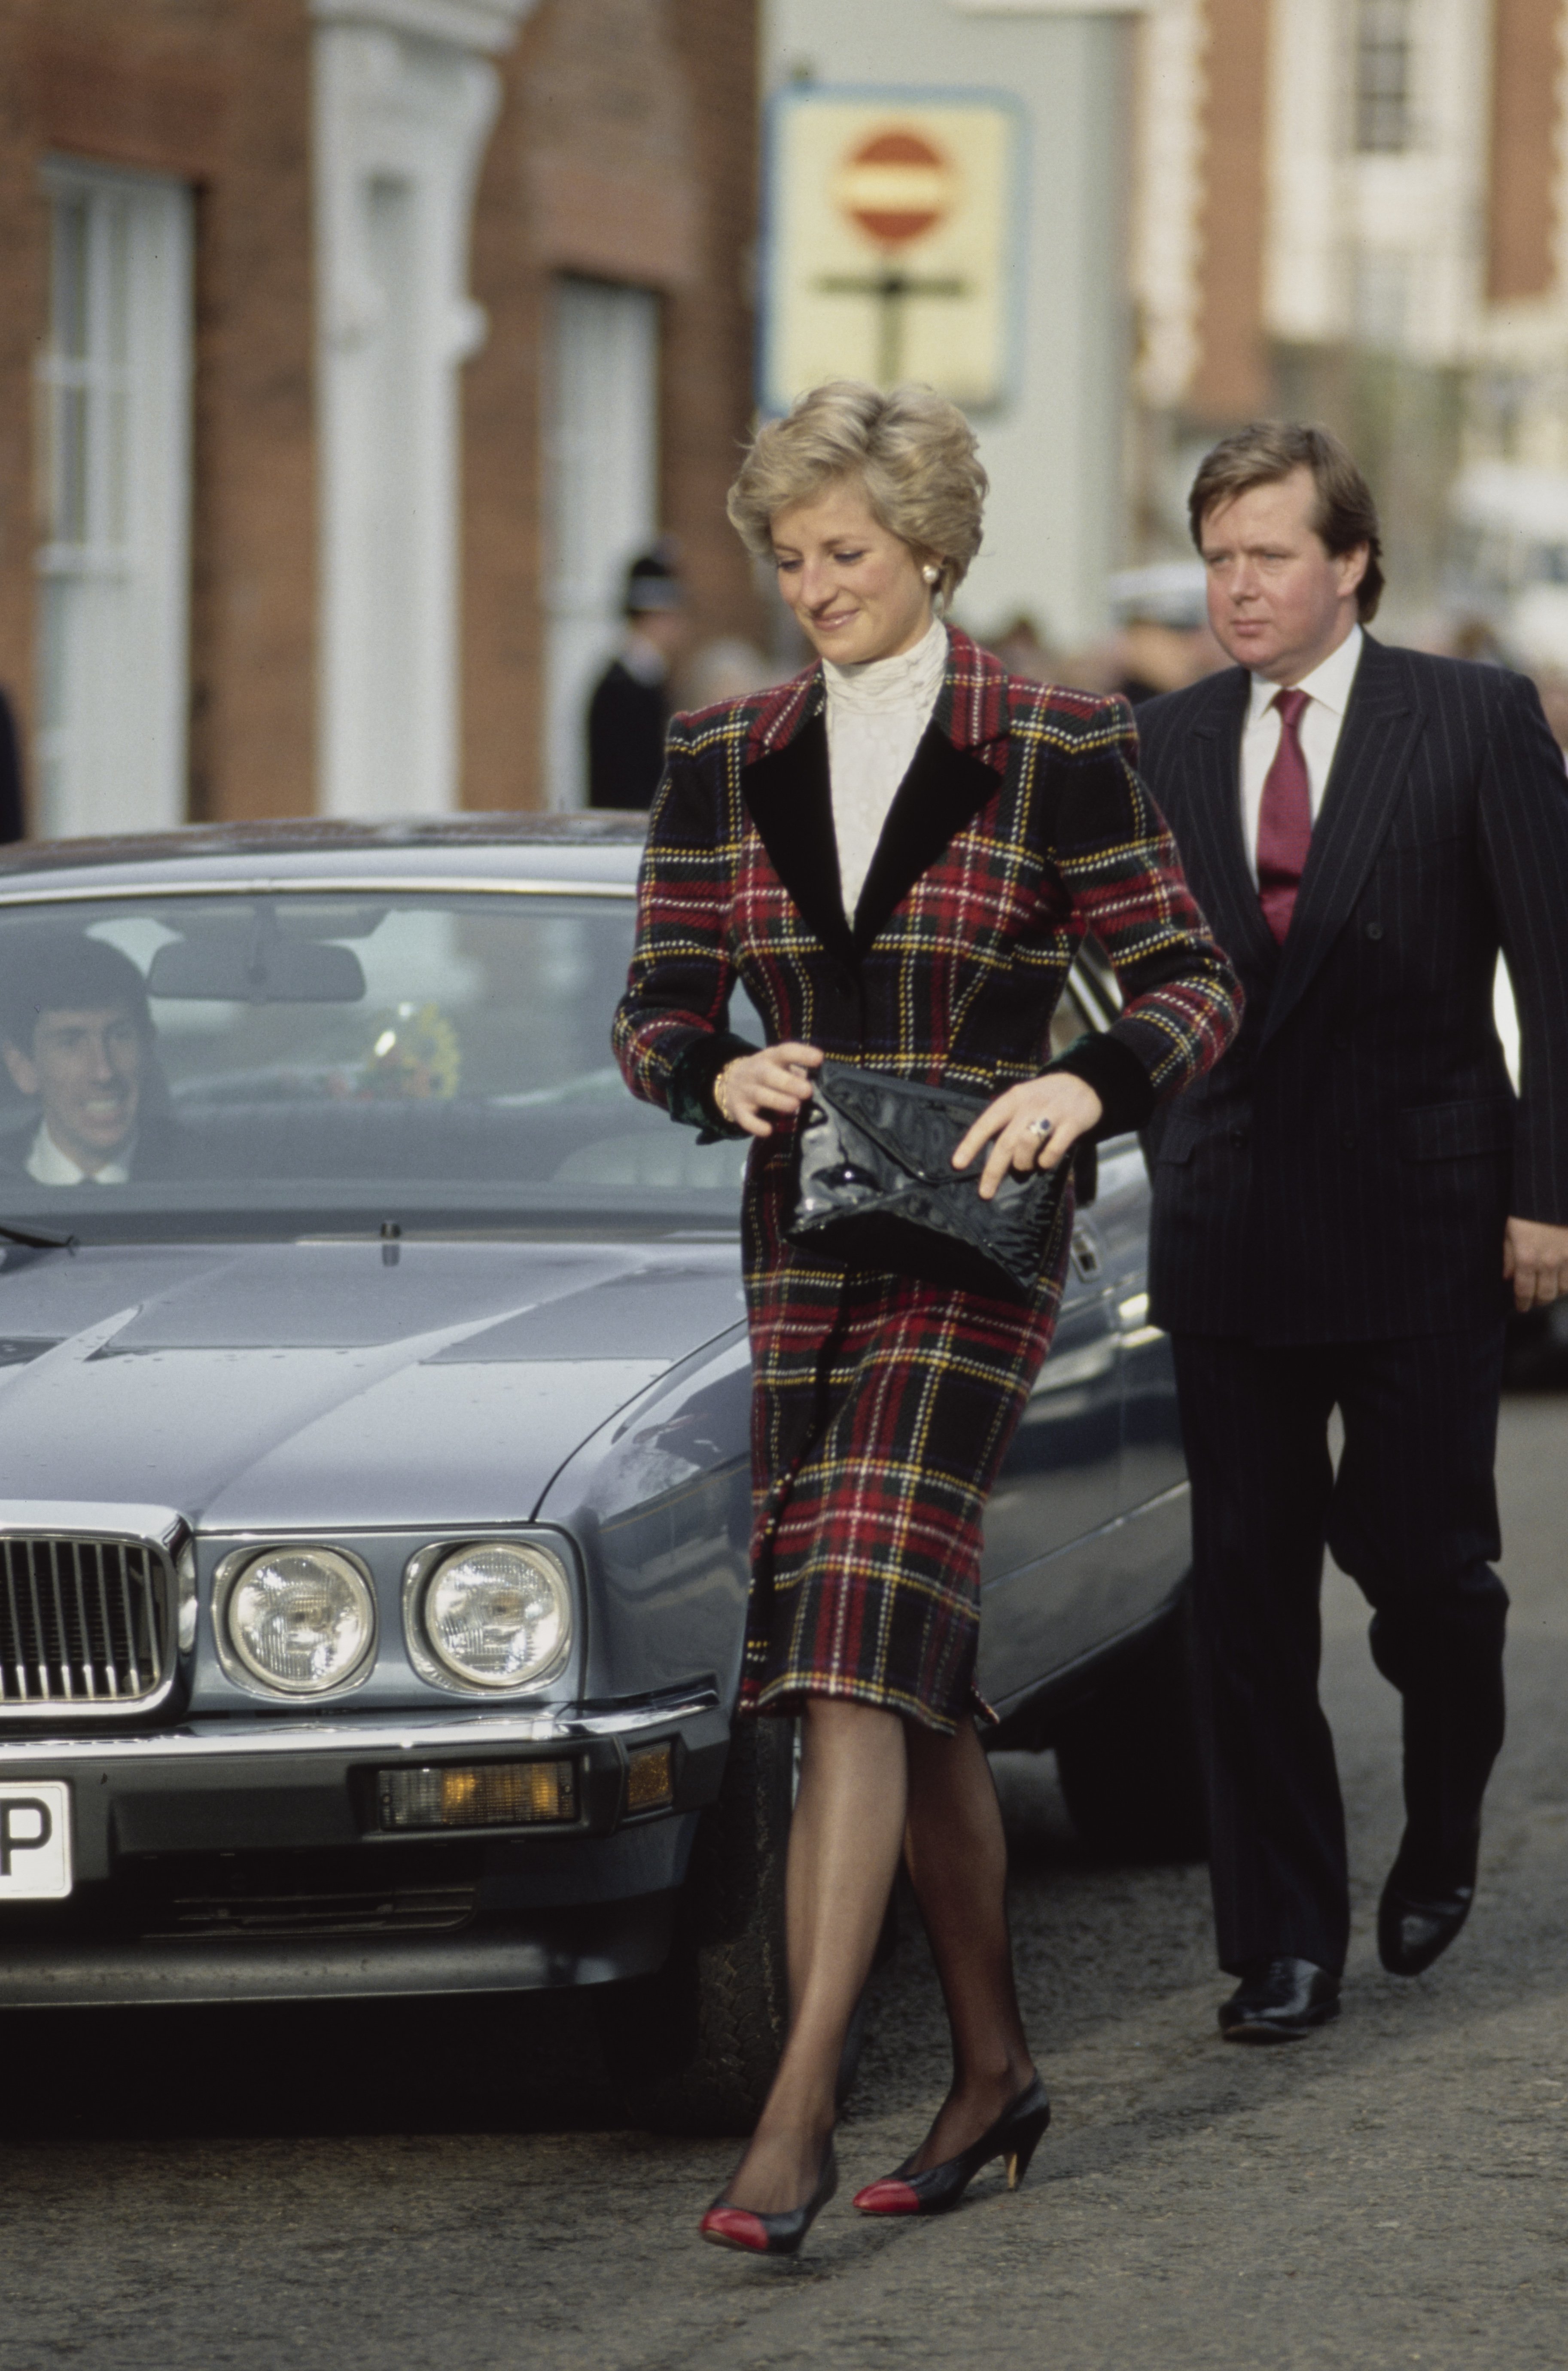 Princess Diana and her bodyguard Ken Wharfe during a visit to Ipswich, Suffolk, England, on February 1, 1990 | Source: Getty Images